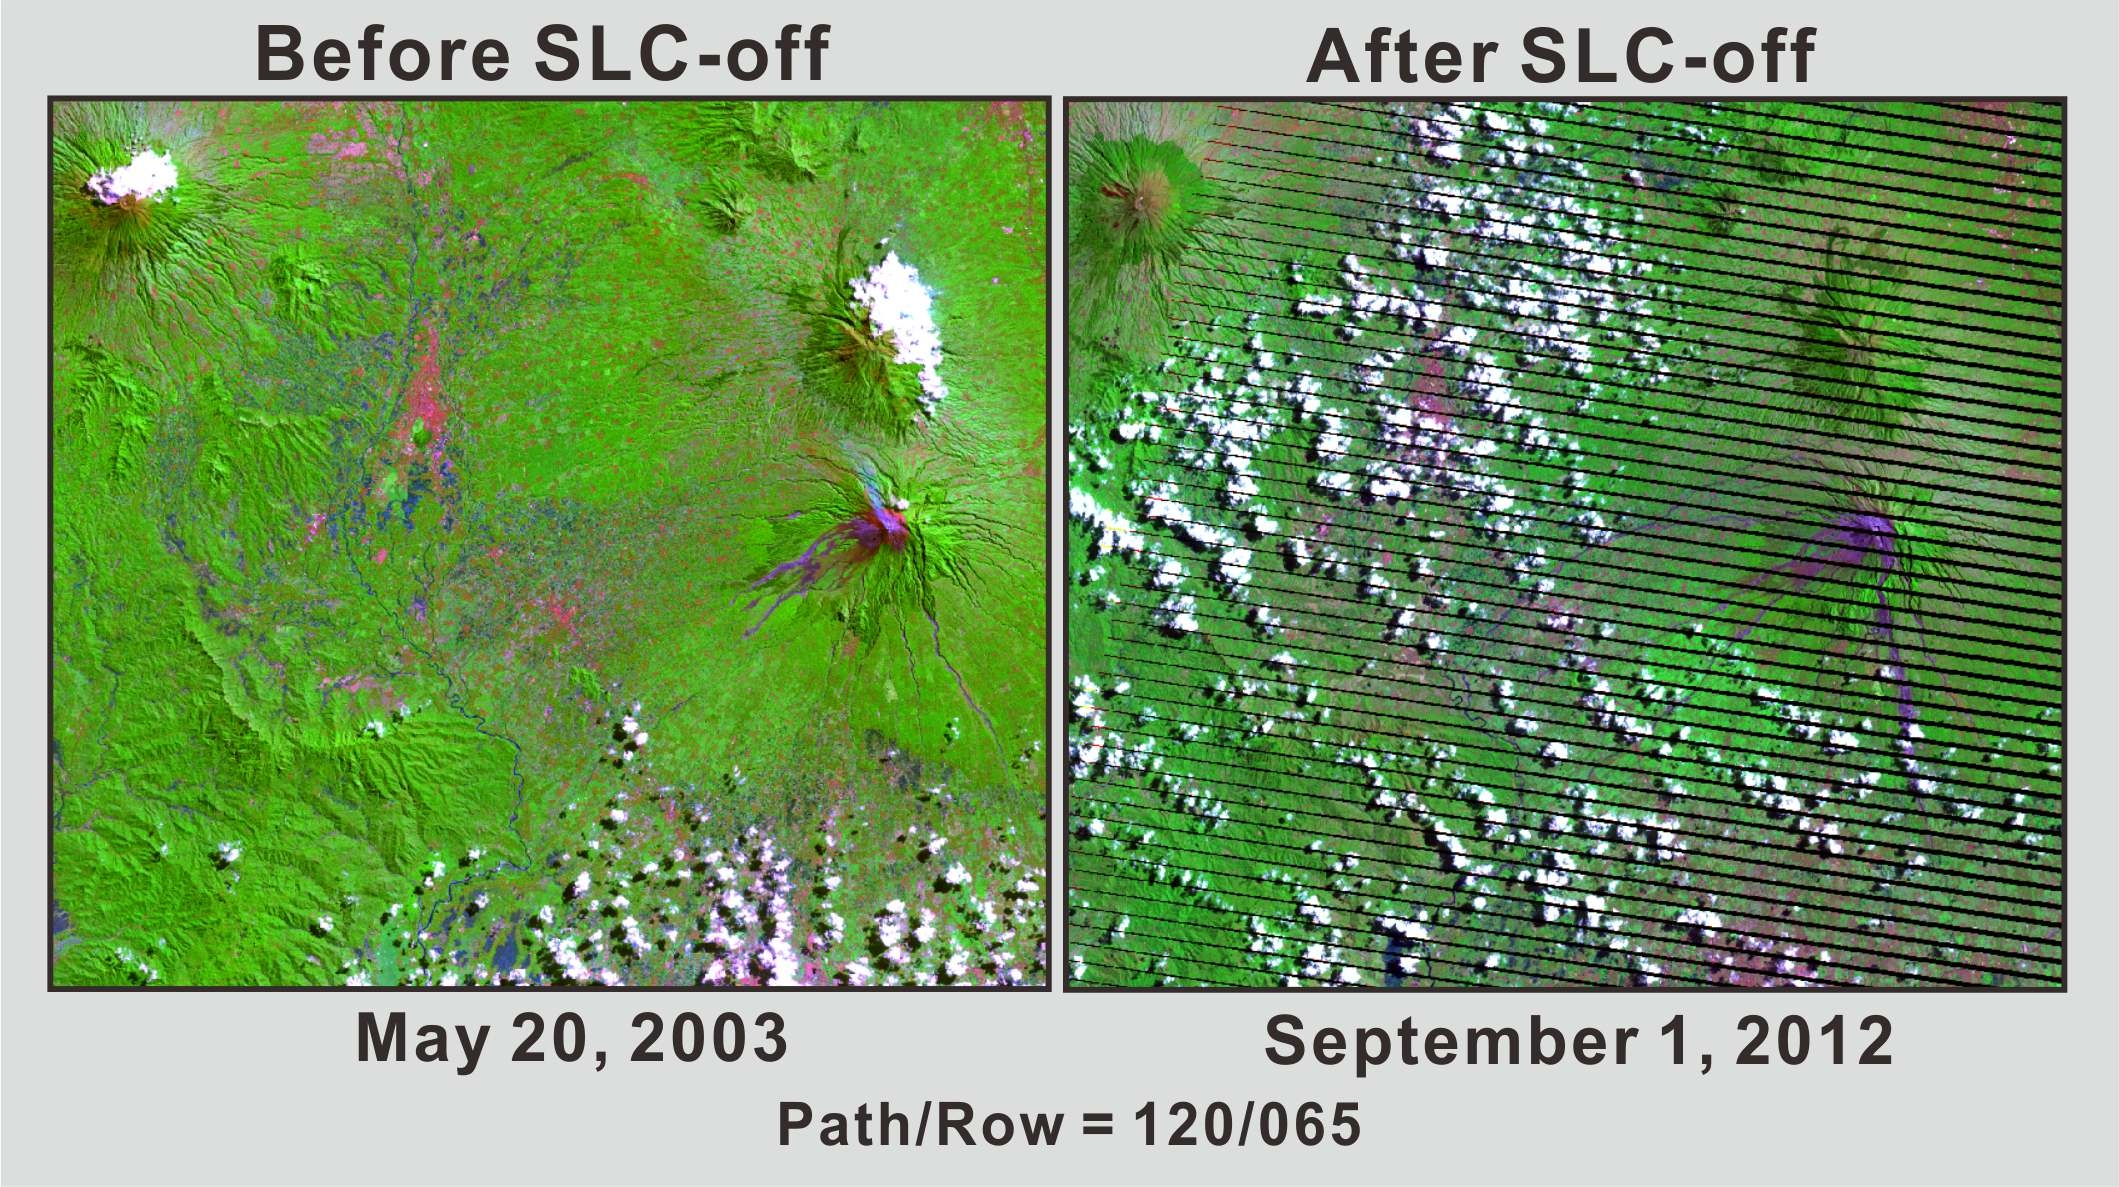 Fig. 3.2.3 Landsat 7 ETM+ images according to before and after SLC failure.